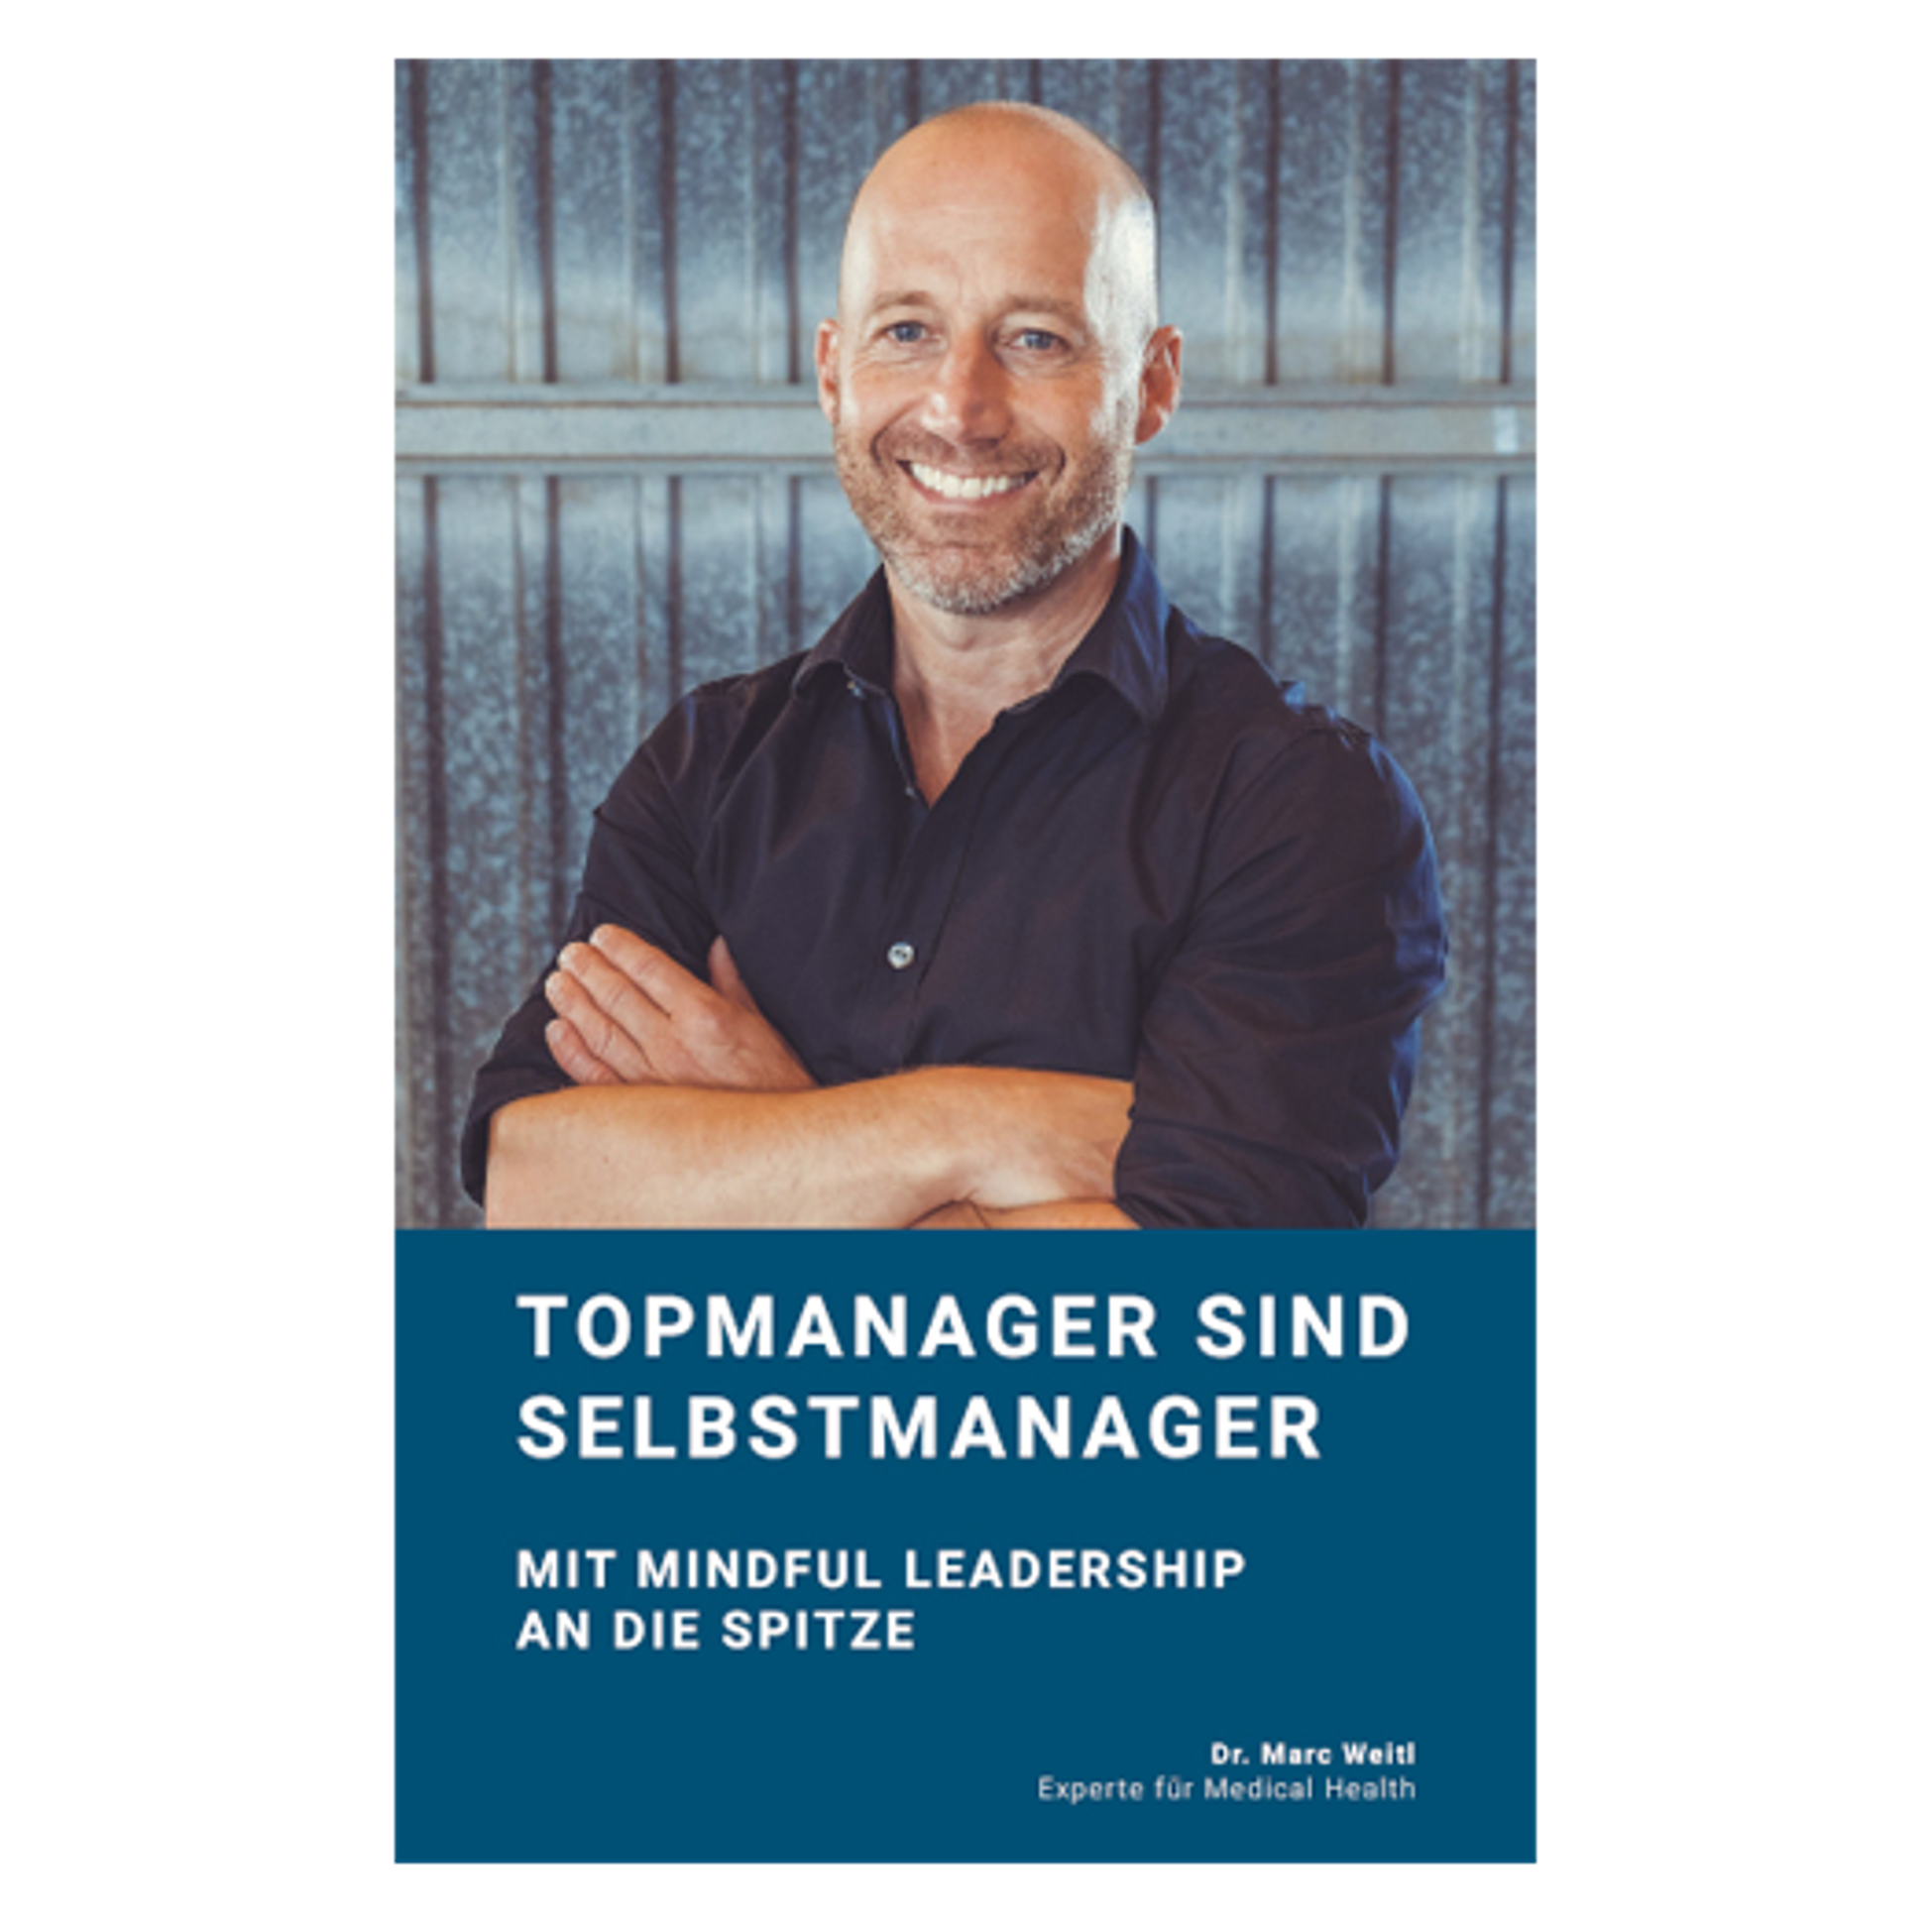 Buch „Topmanager sind Selbstmanager